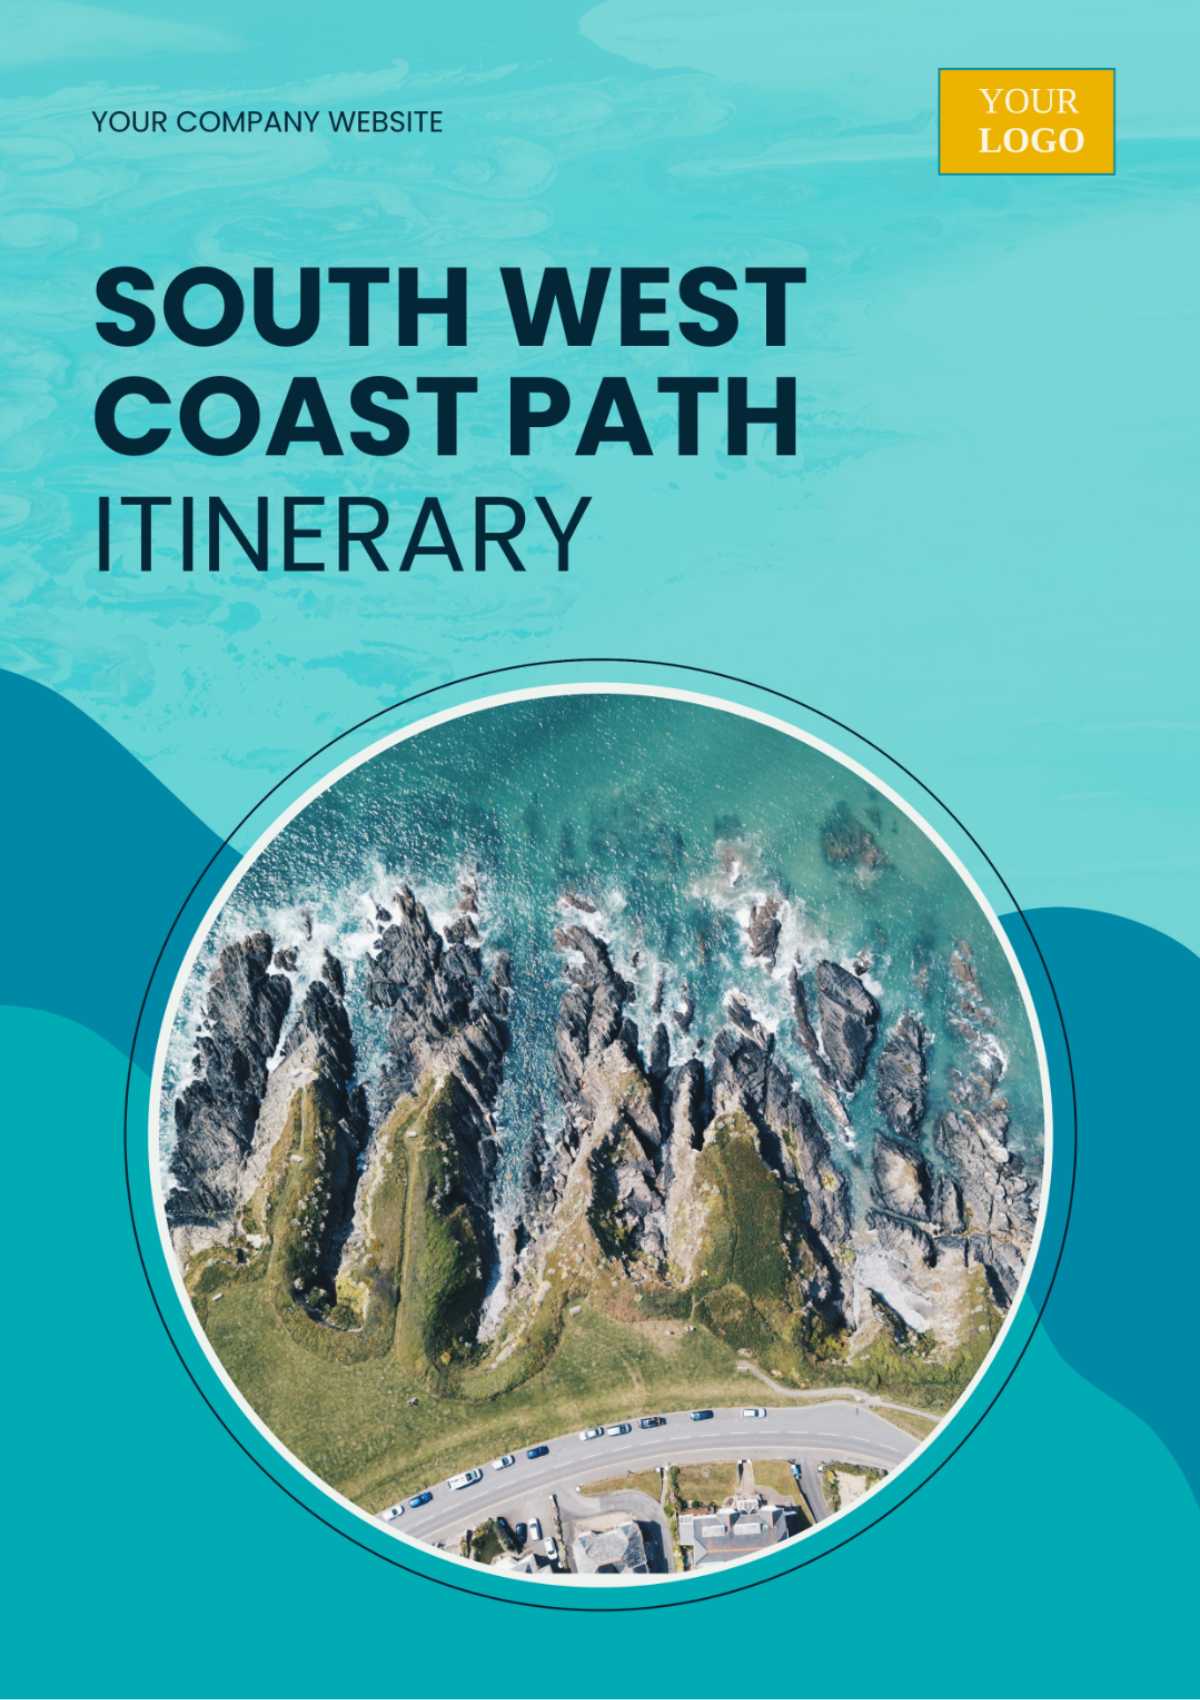 South West Coast Path Itinerary Template